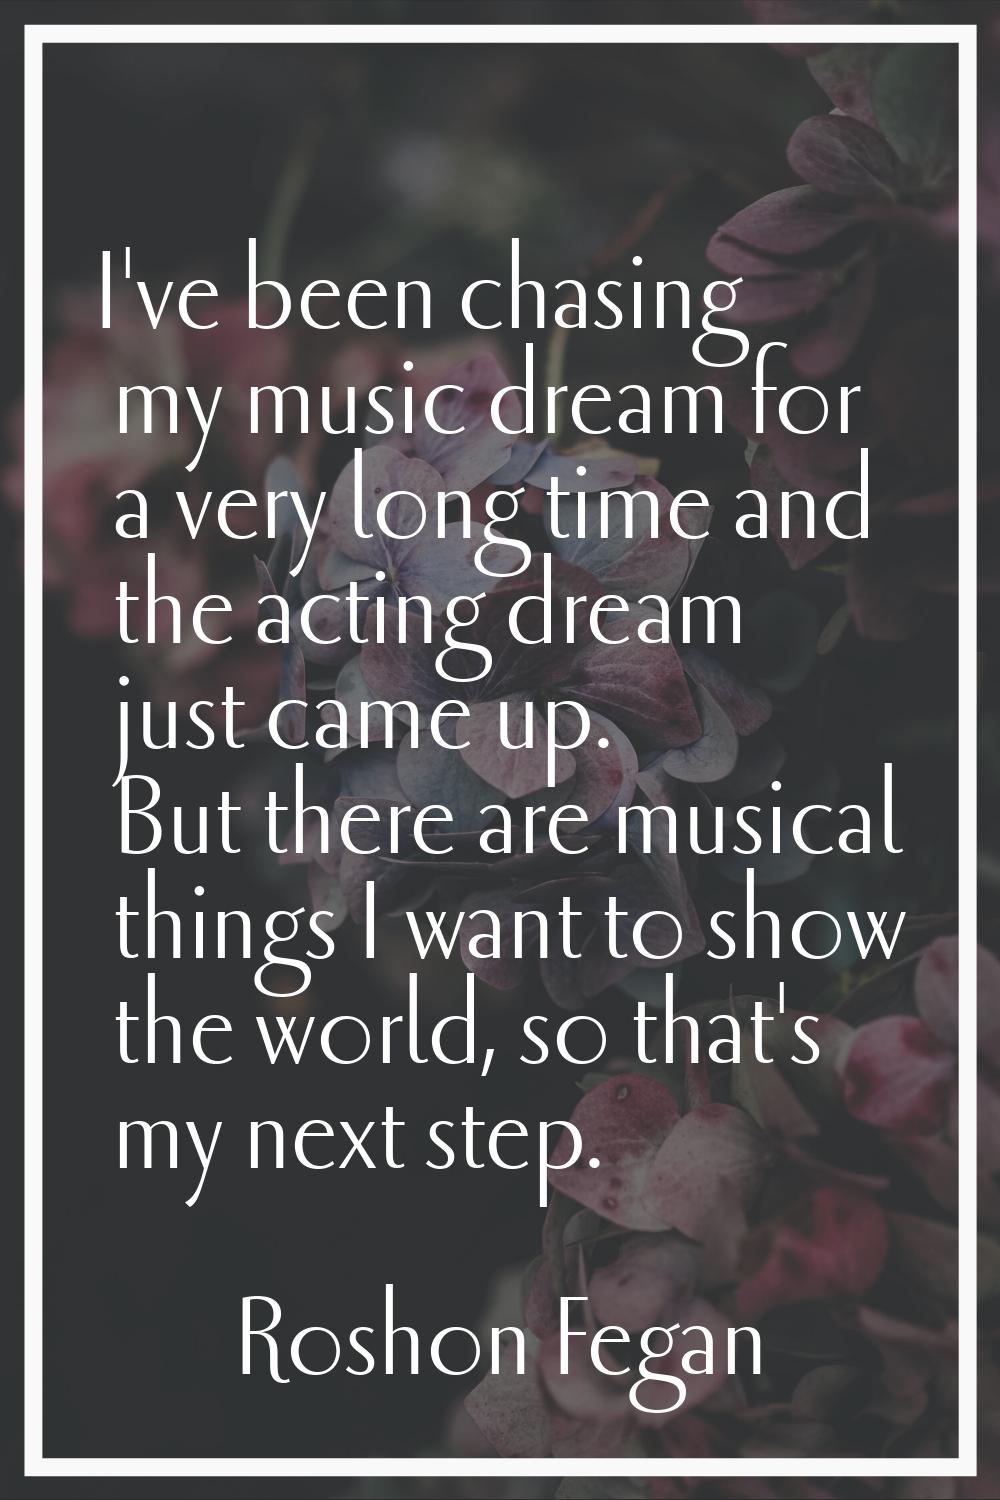 I've been chasing my music dream for a very long time and the acting dream just came up. But there 